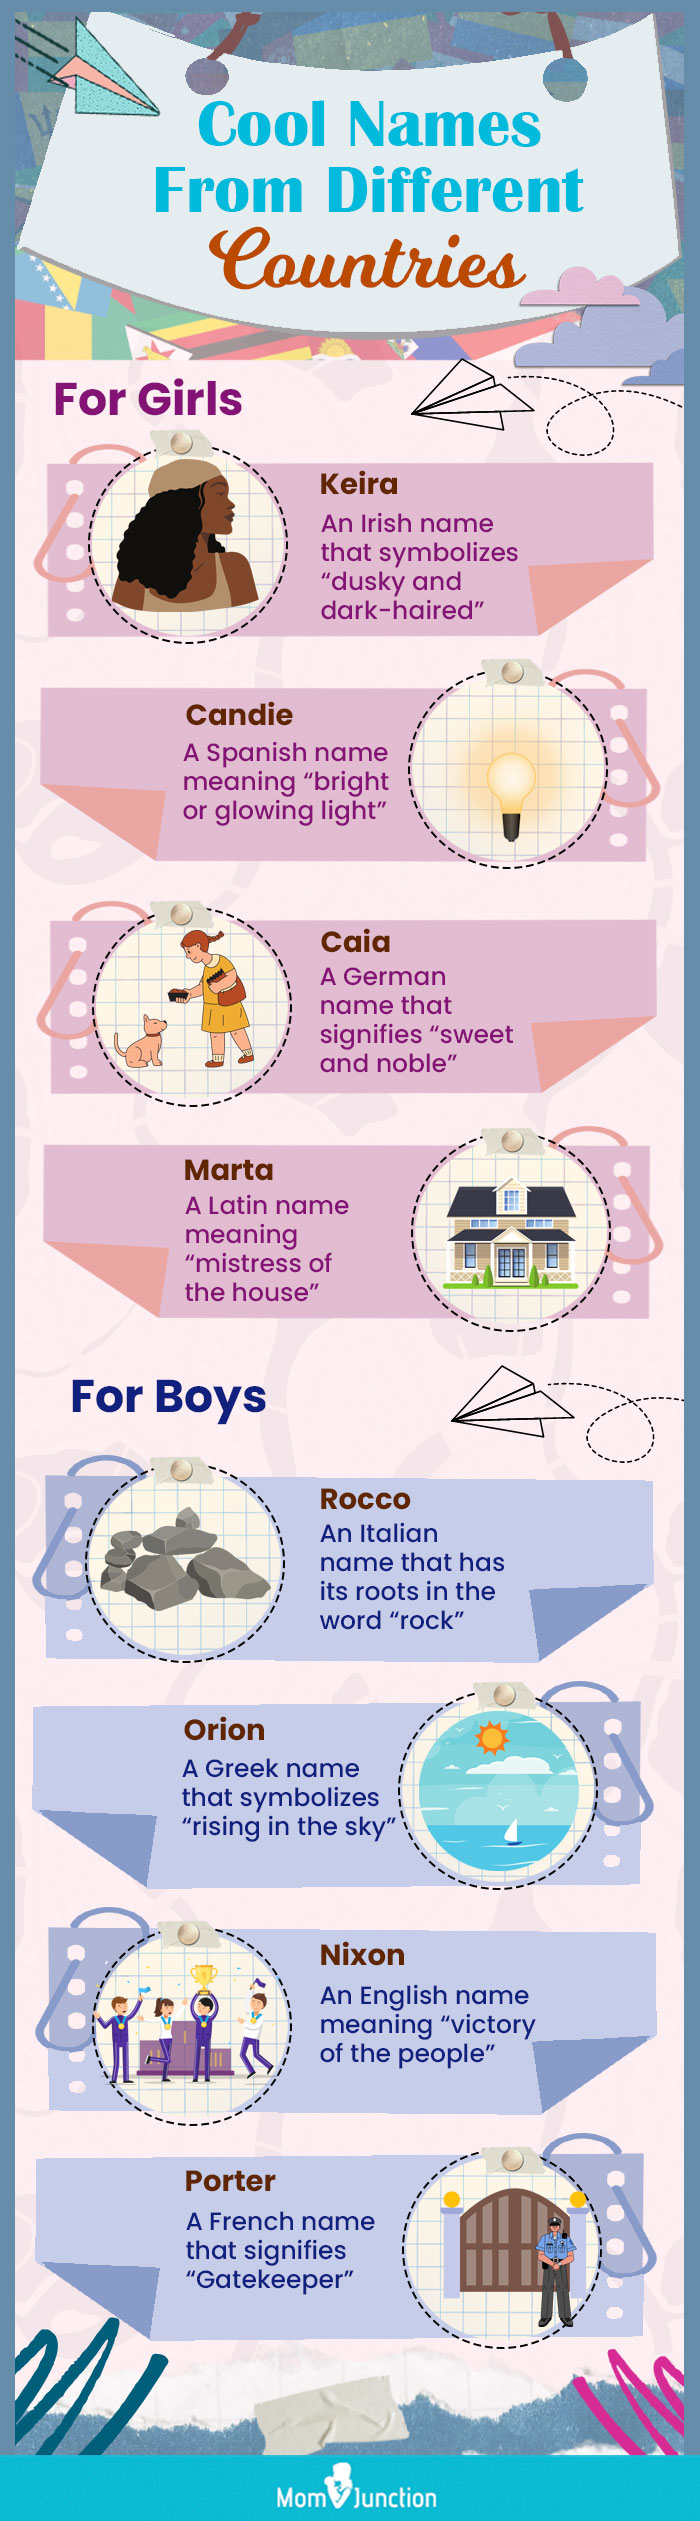 cool names from different countries (infographic)